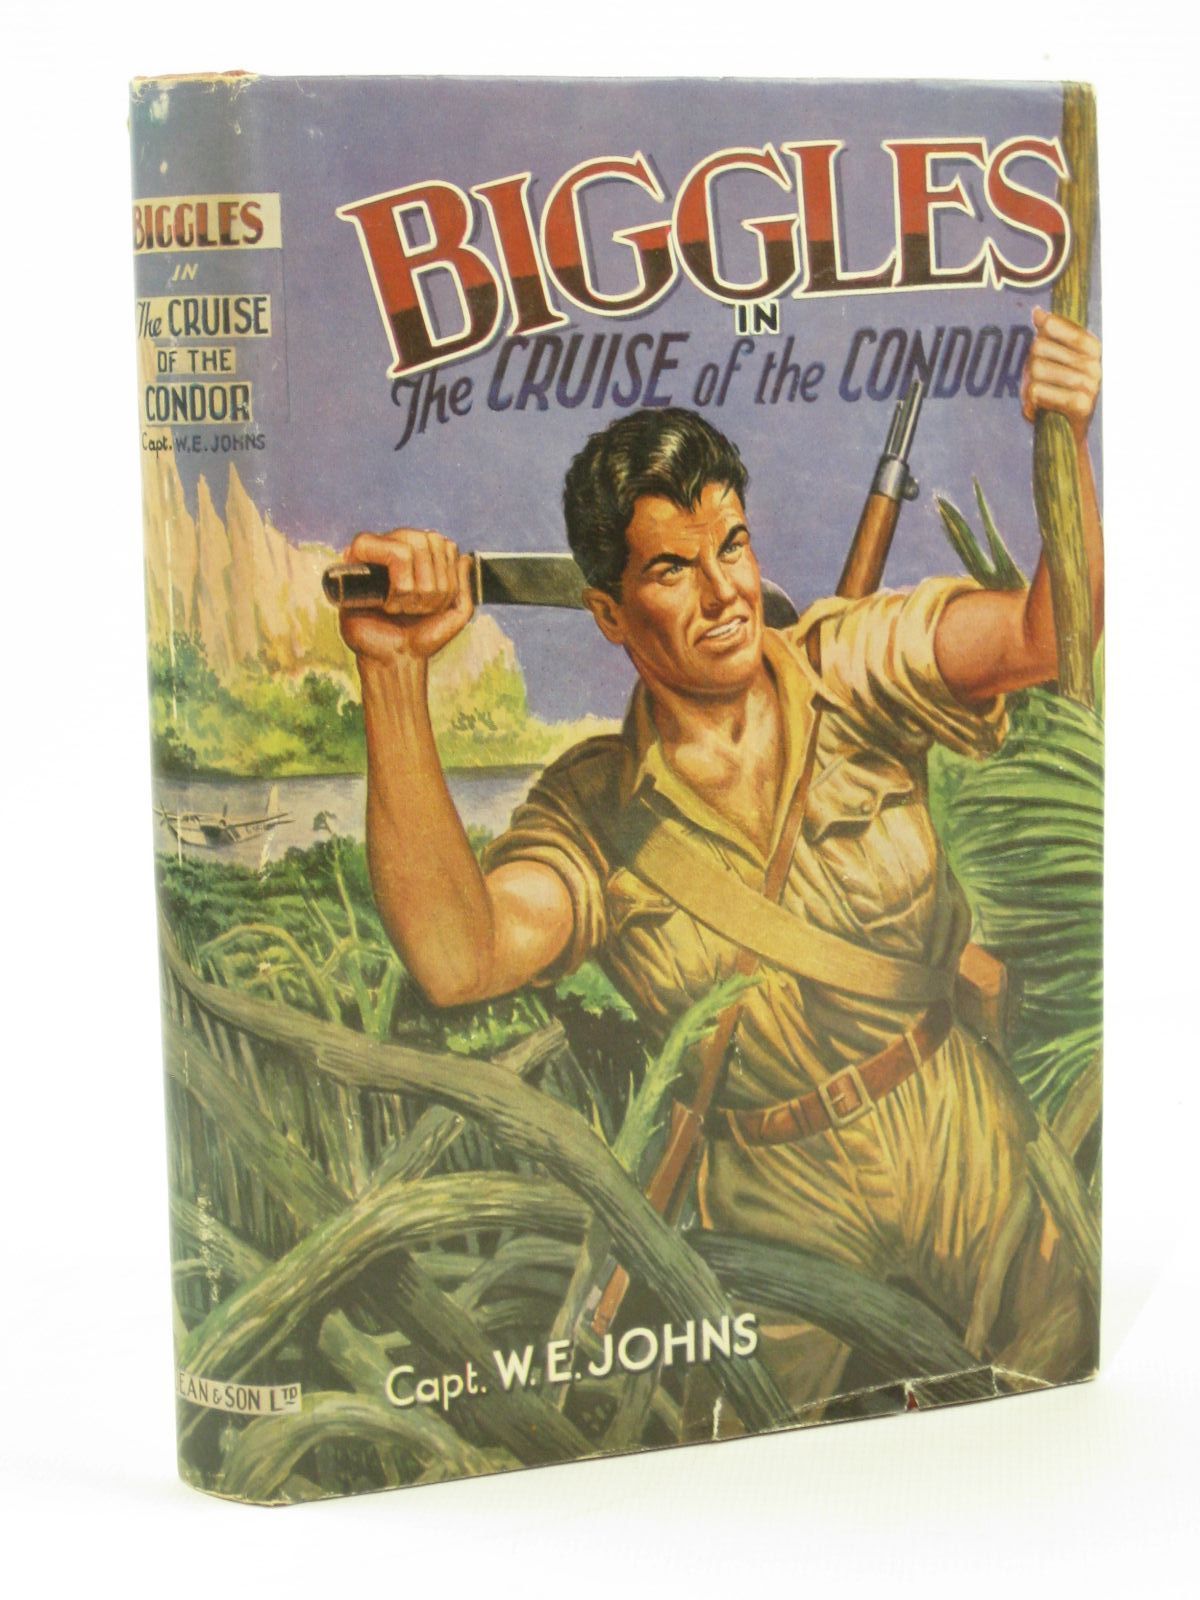 Cover of BIGGLES IN THE CRUISE OF THE CONDOR by W.E. Johns